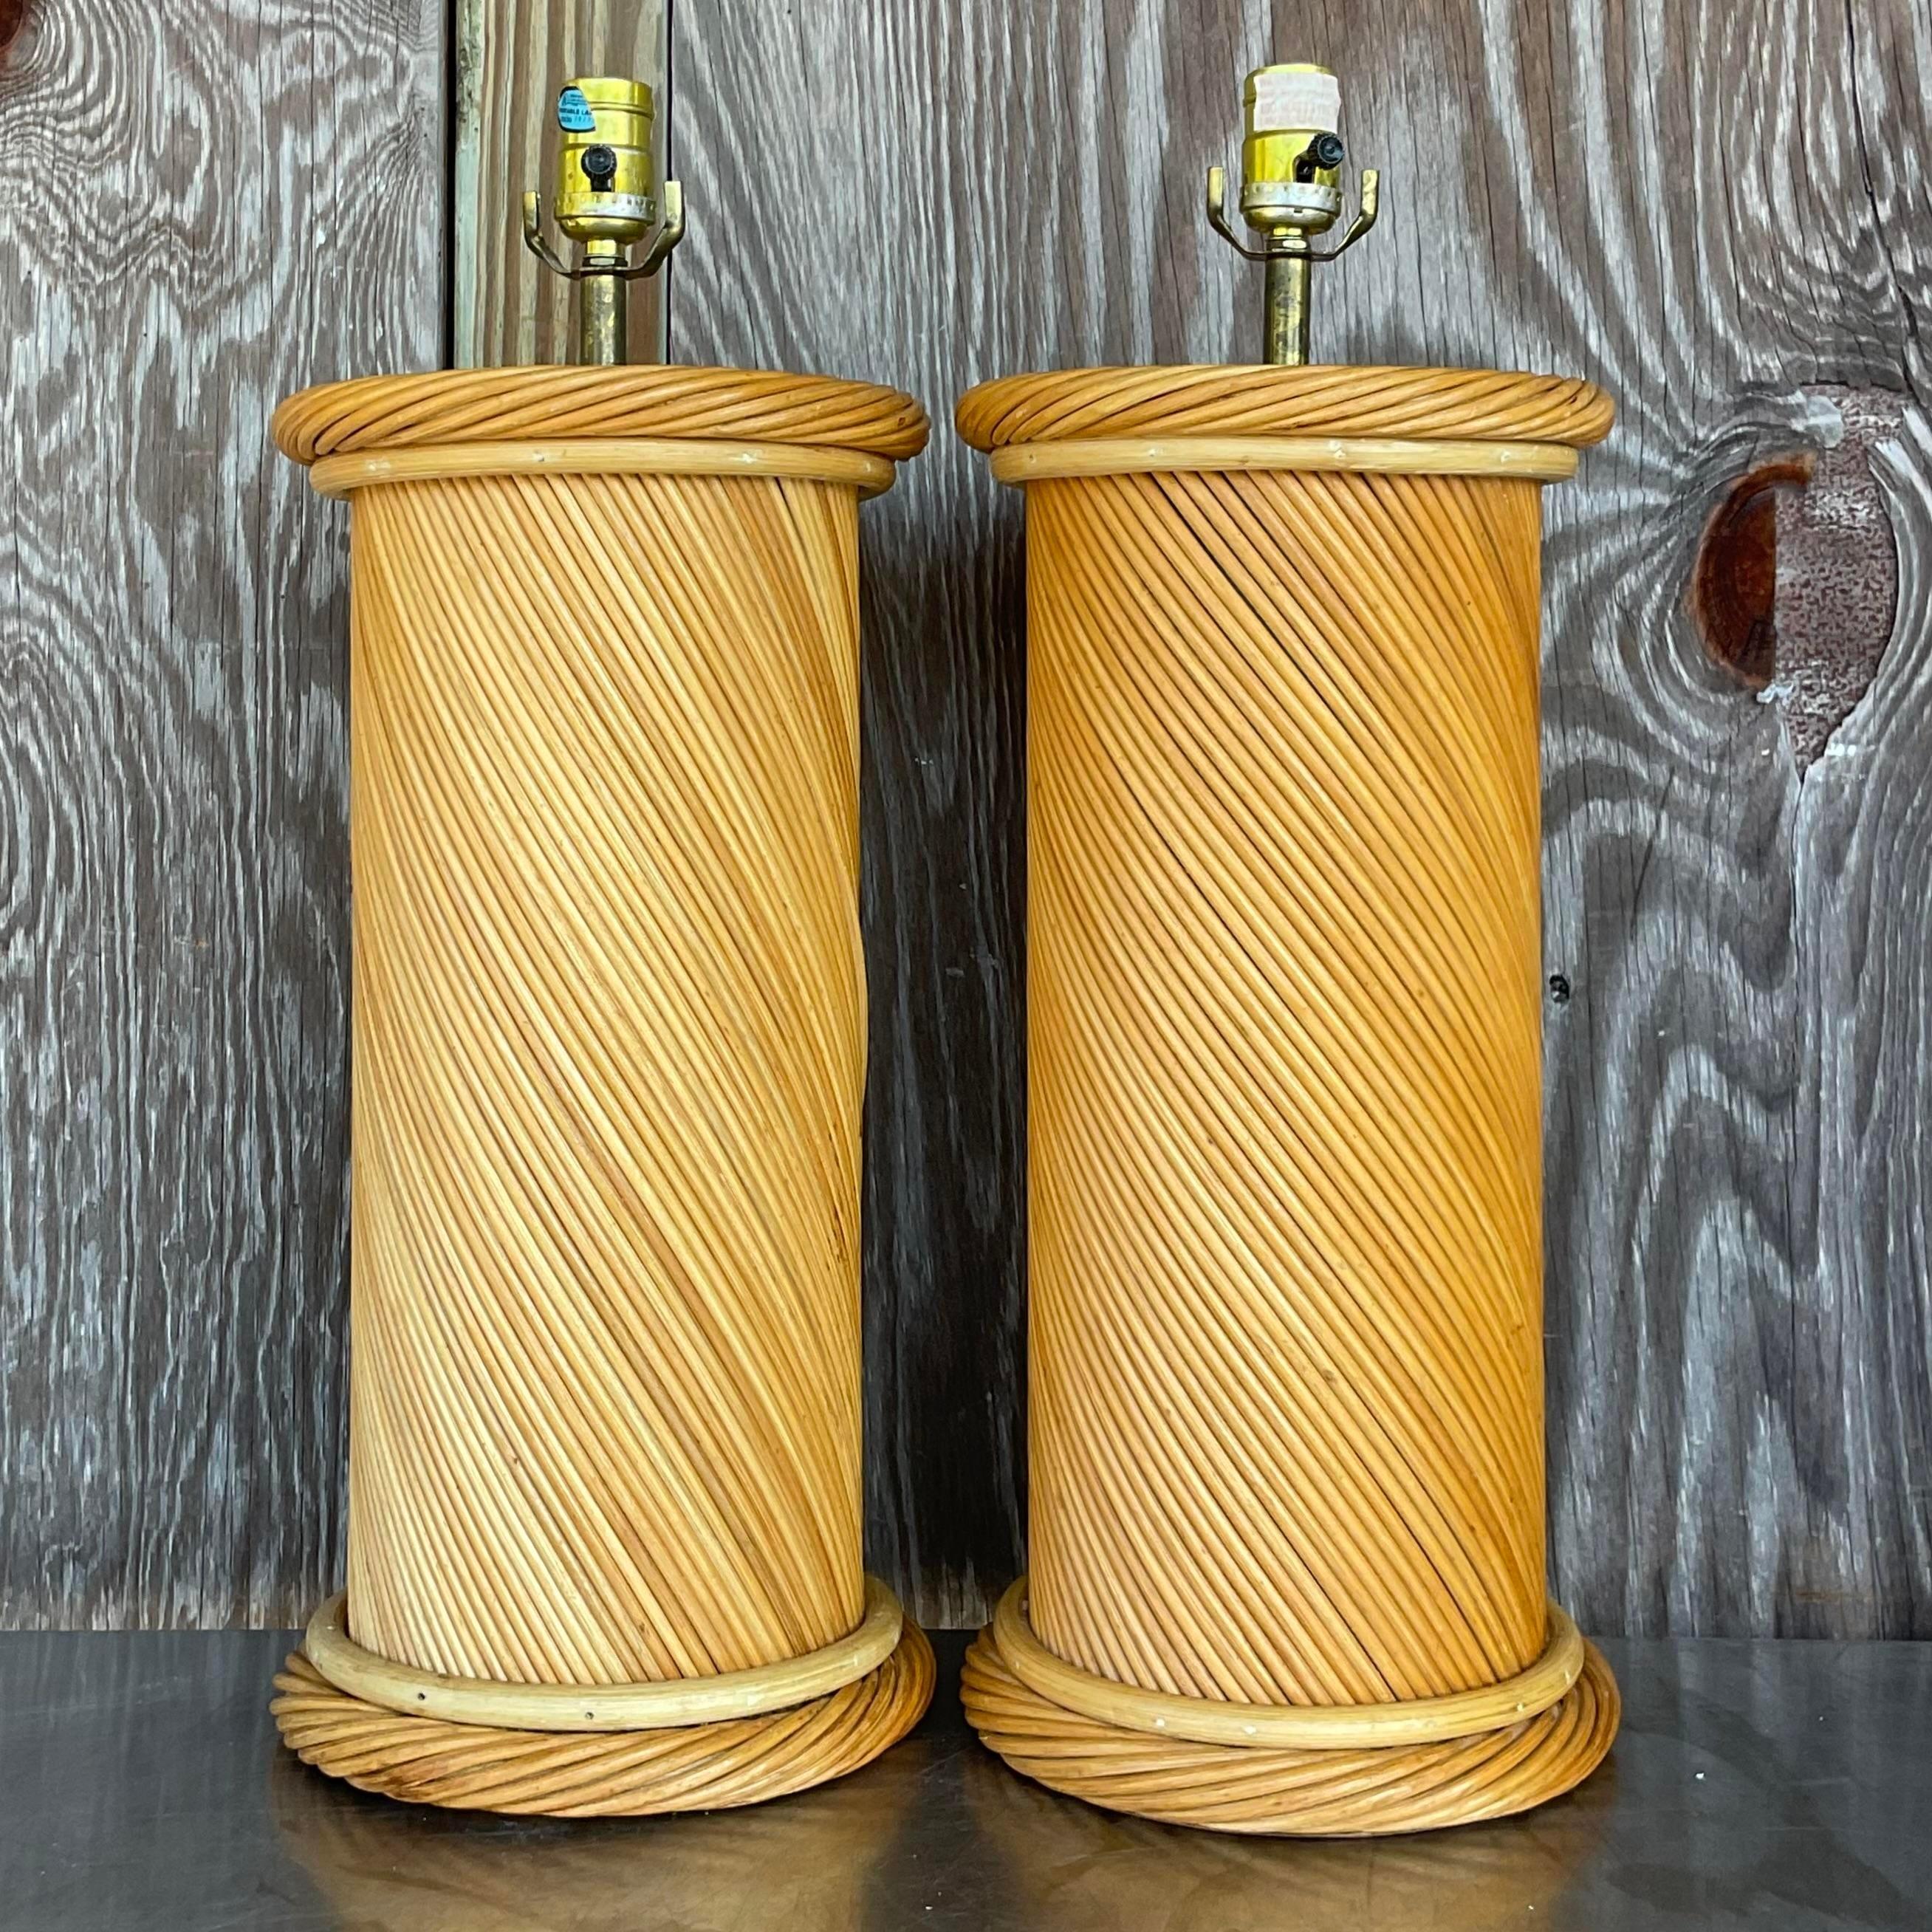 20th Century Vintage Coastal Twisted Pencil Reed Lamps - a Pair For Sale